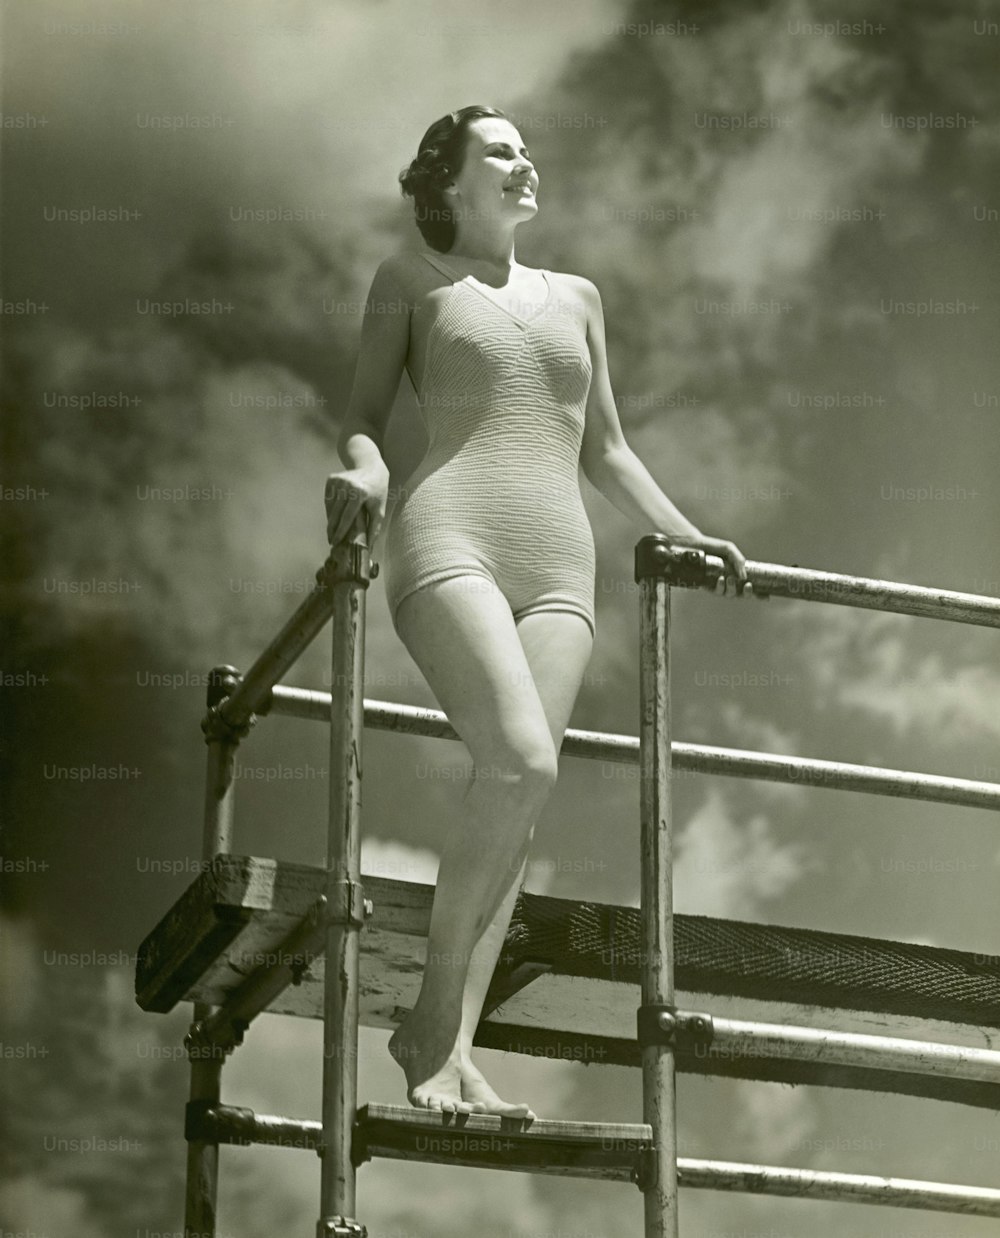 UNITED STATES - CIRCA 1950s:  Woman in bathing suit on diving board ladder.